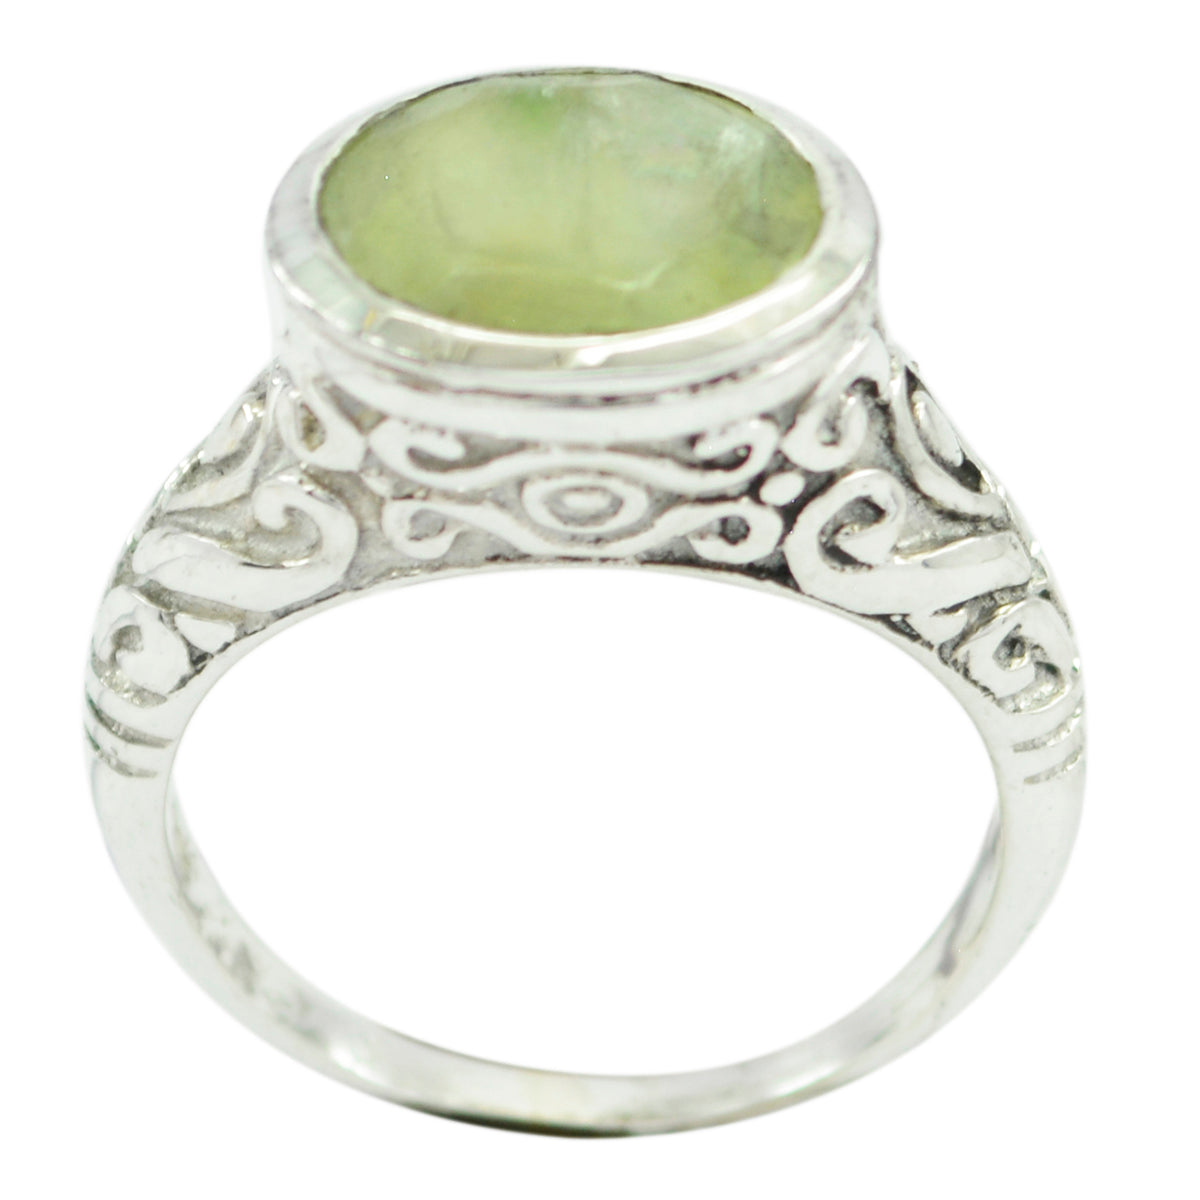 Engaging Gemstone Prehnite Solid Silver Rings Gift For Friendship